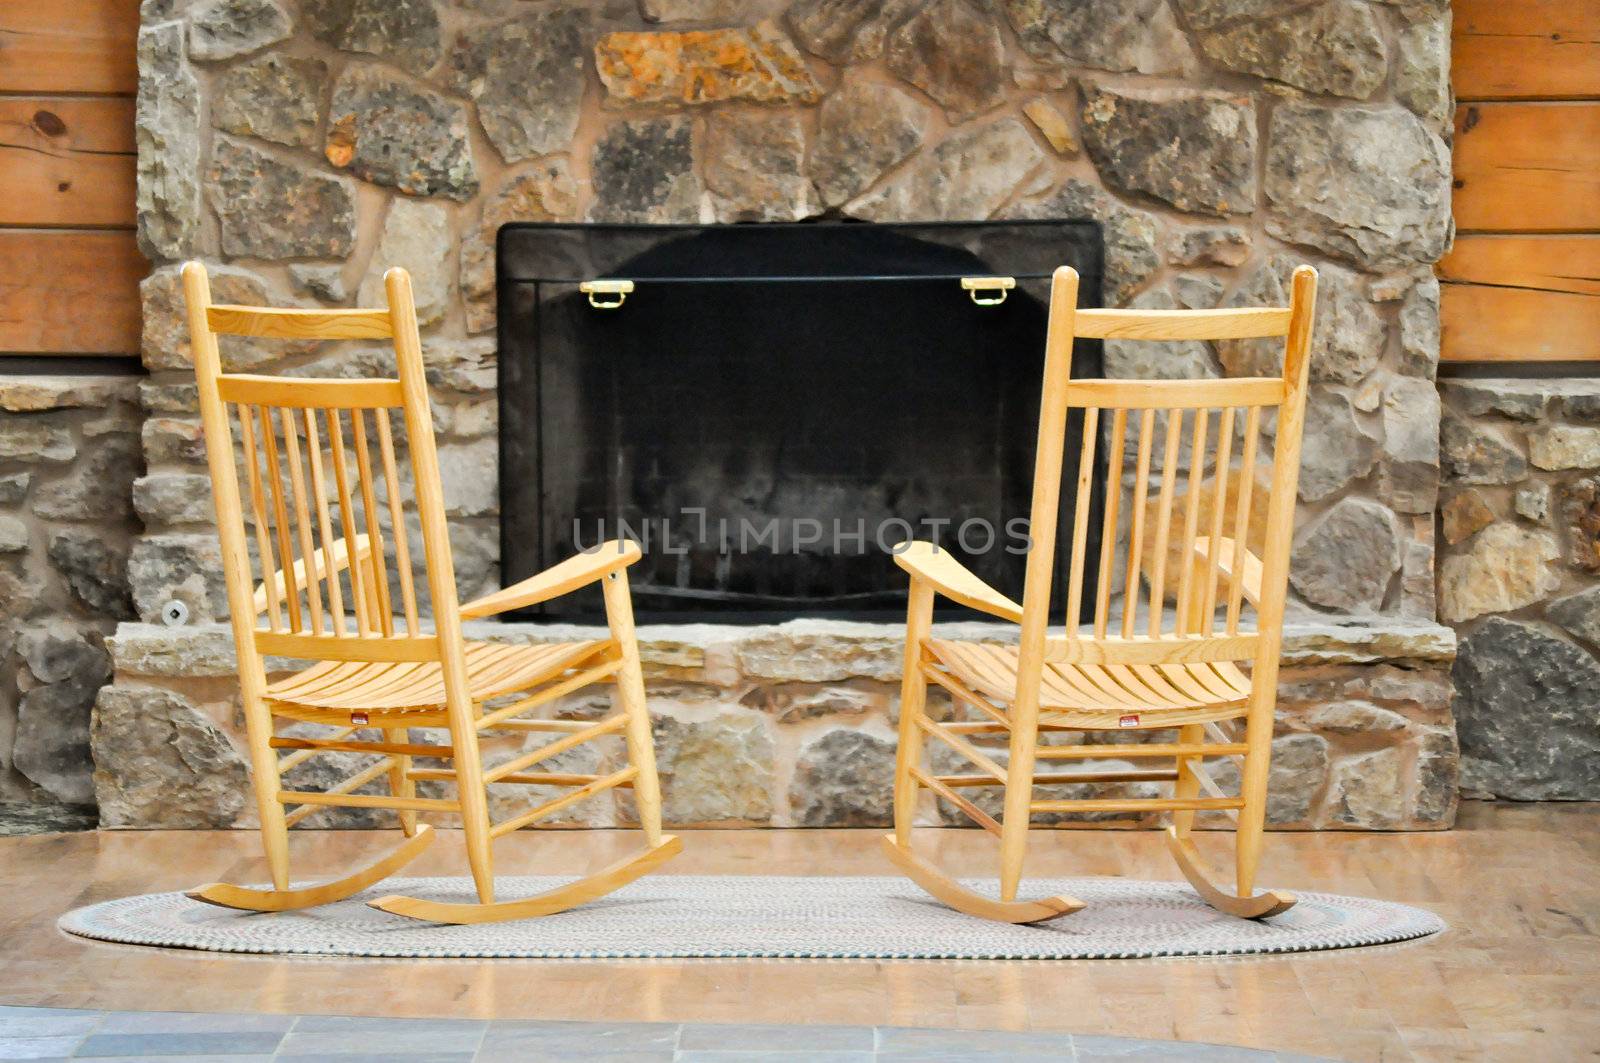 Chairs by the Hearth by RefocusPhoto